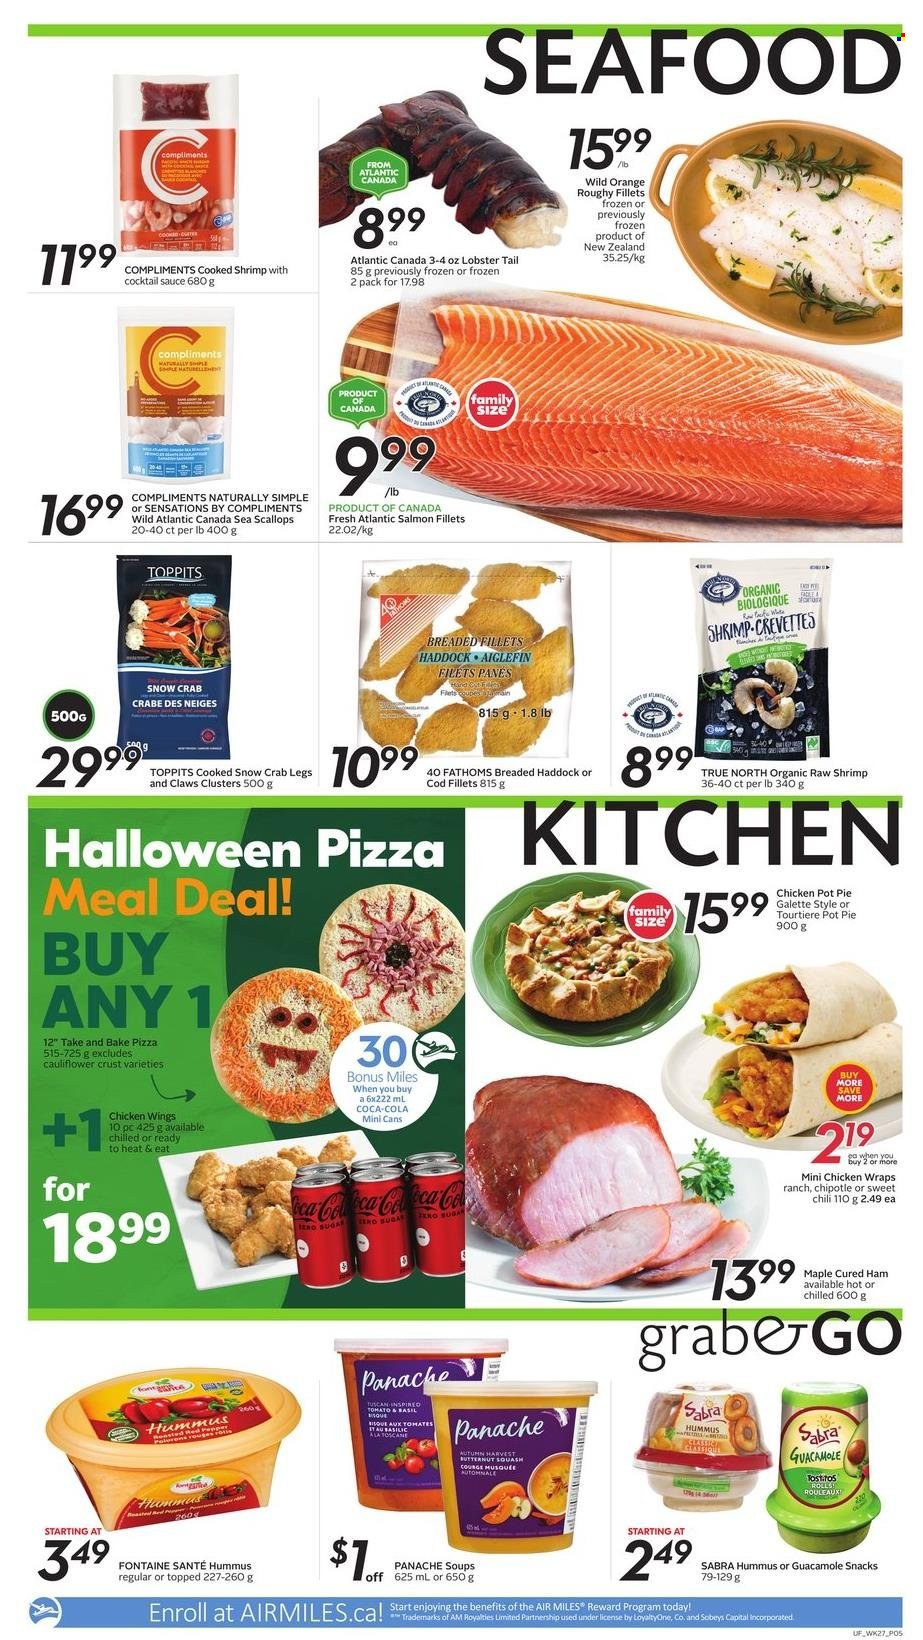 thumbnail - Sobeys Urban Fresh Flyer - October 28, 2021 - November 03, 2021 - Sales products - pie, wraps, pot pie, butternut squash, cod, lobster, salmon, salmon fillet, scallops, haddock, seafood, crab legs, crab, lobster tail, shrimps, pizza, sauce, ham, hummus, guacamole, chicken wings, snack, Tostitos, cocktail sauce, Coca-Cola, oranges. Page 4.